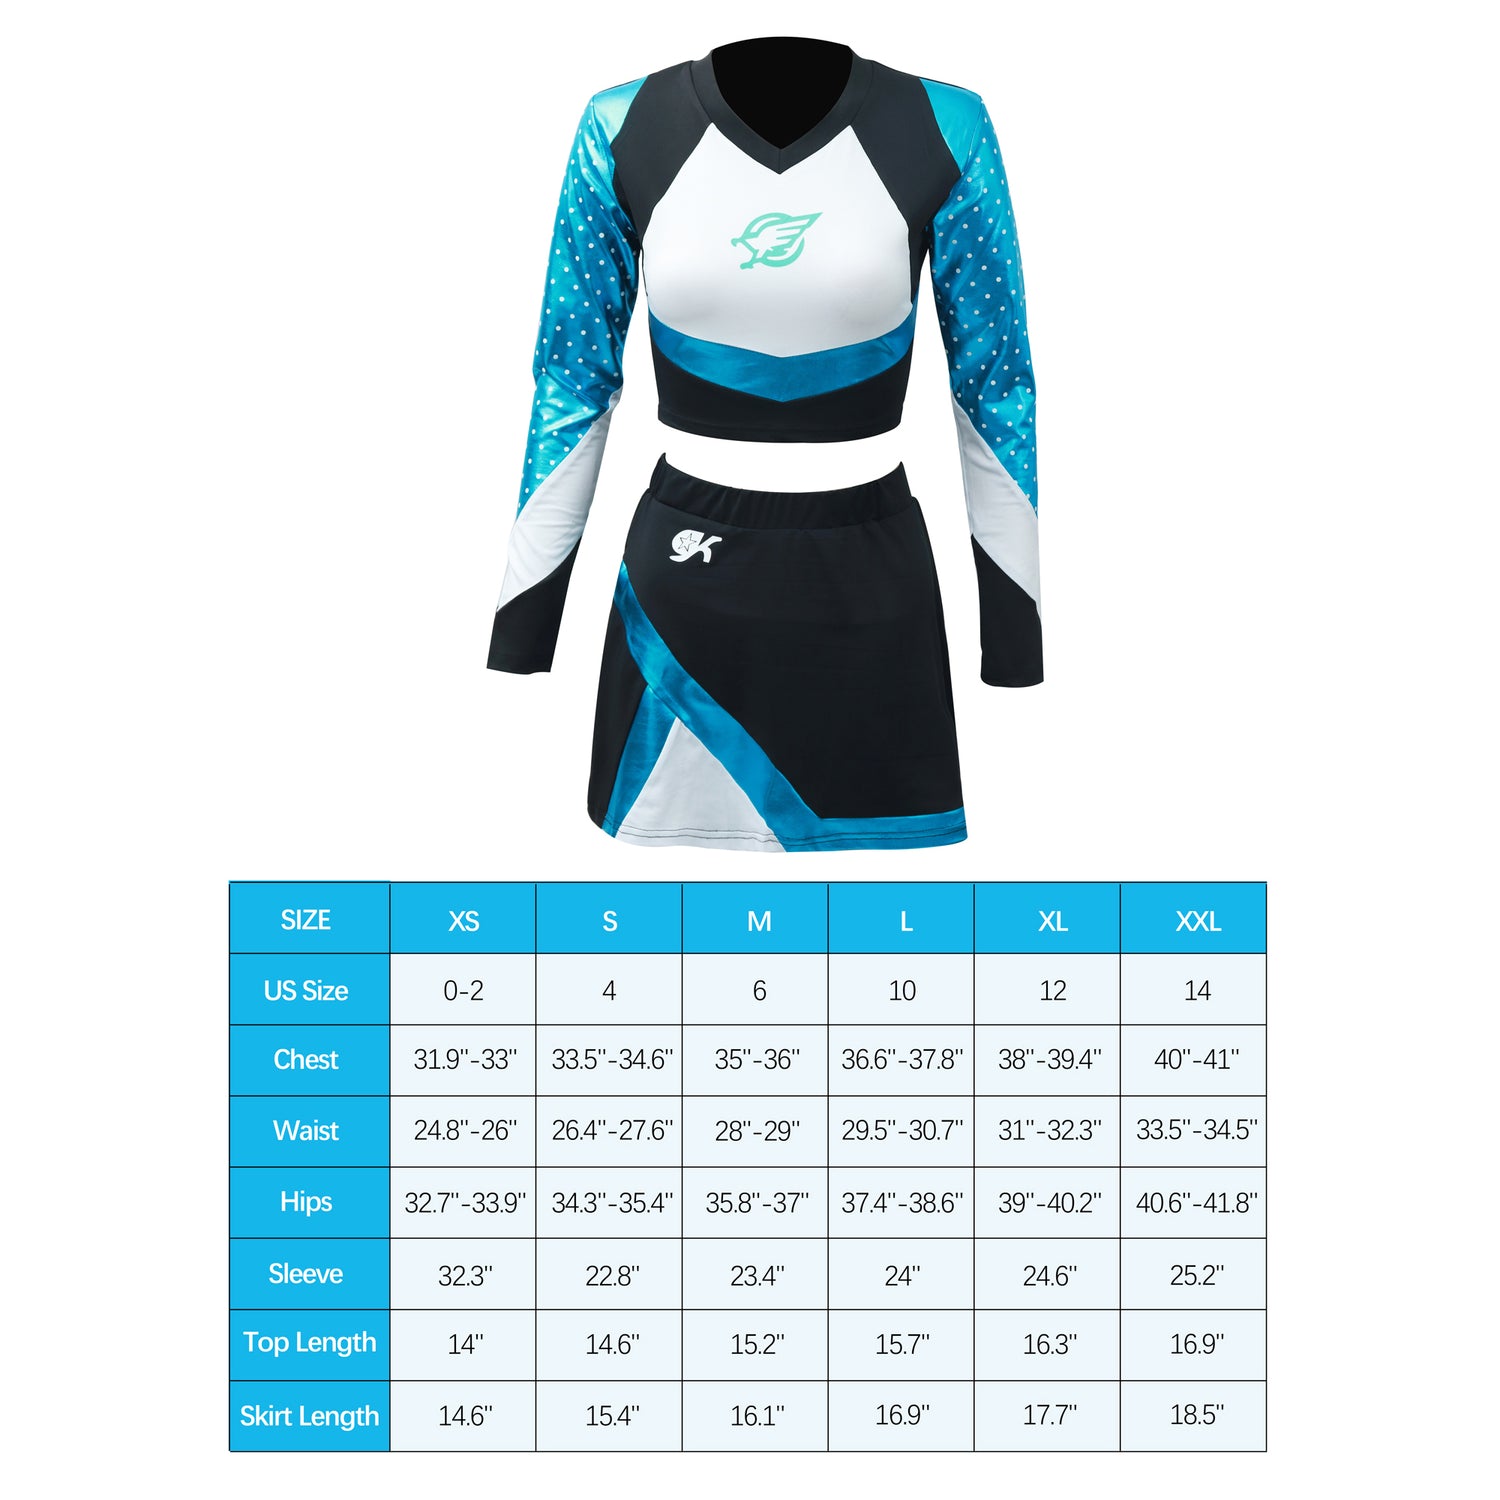 Maddy Perez Cheerleader Cosplay Outfits Long Sleeve School Cheer Uniform Costume for Women